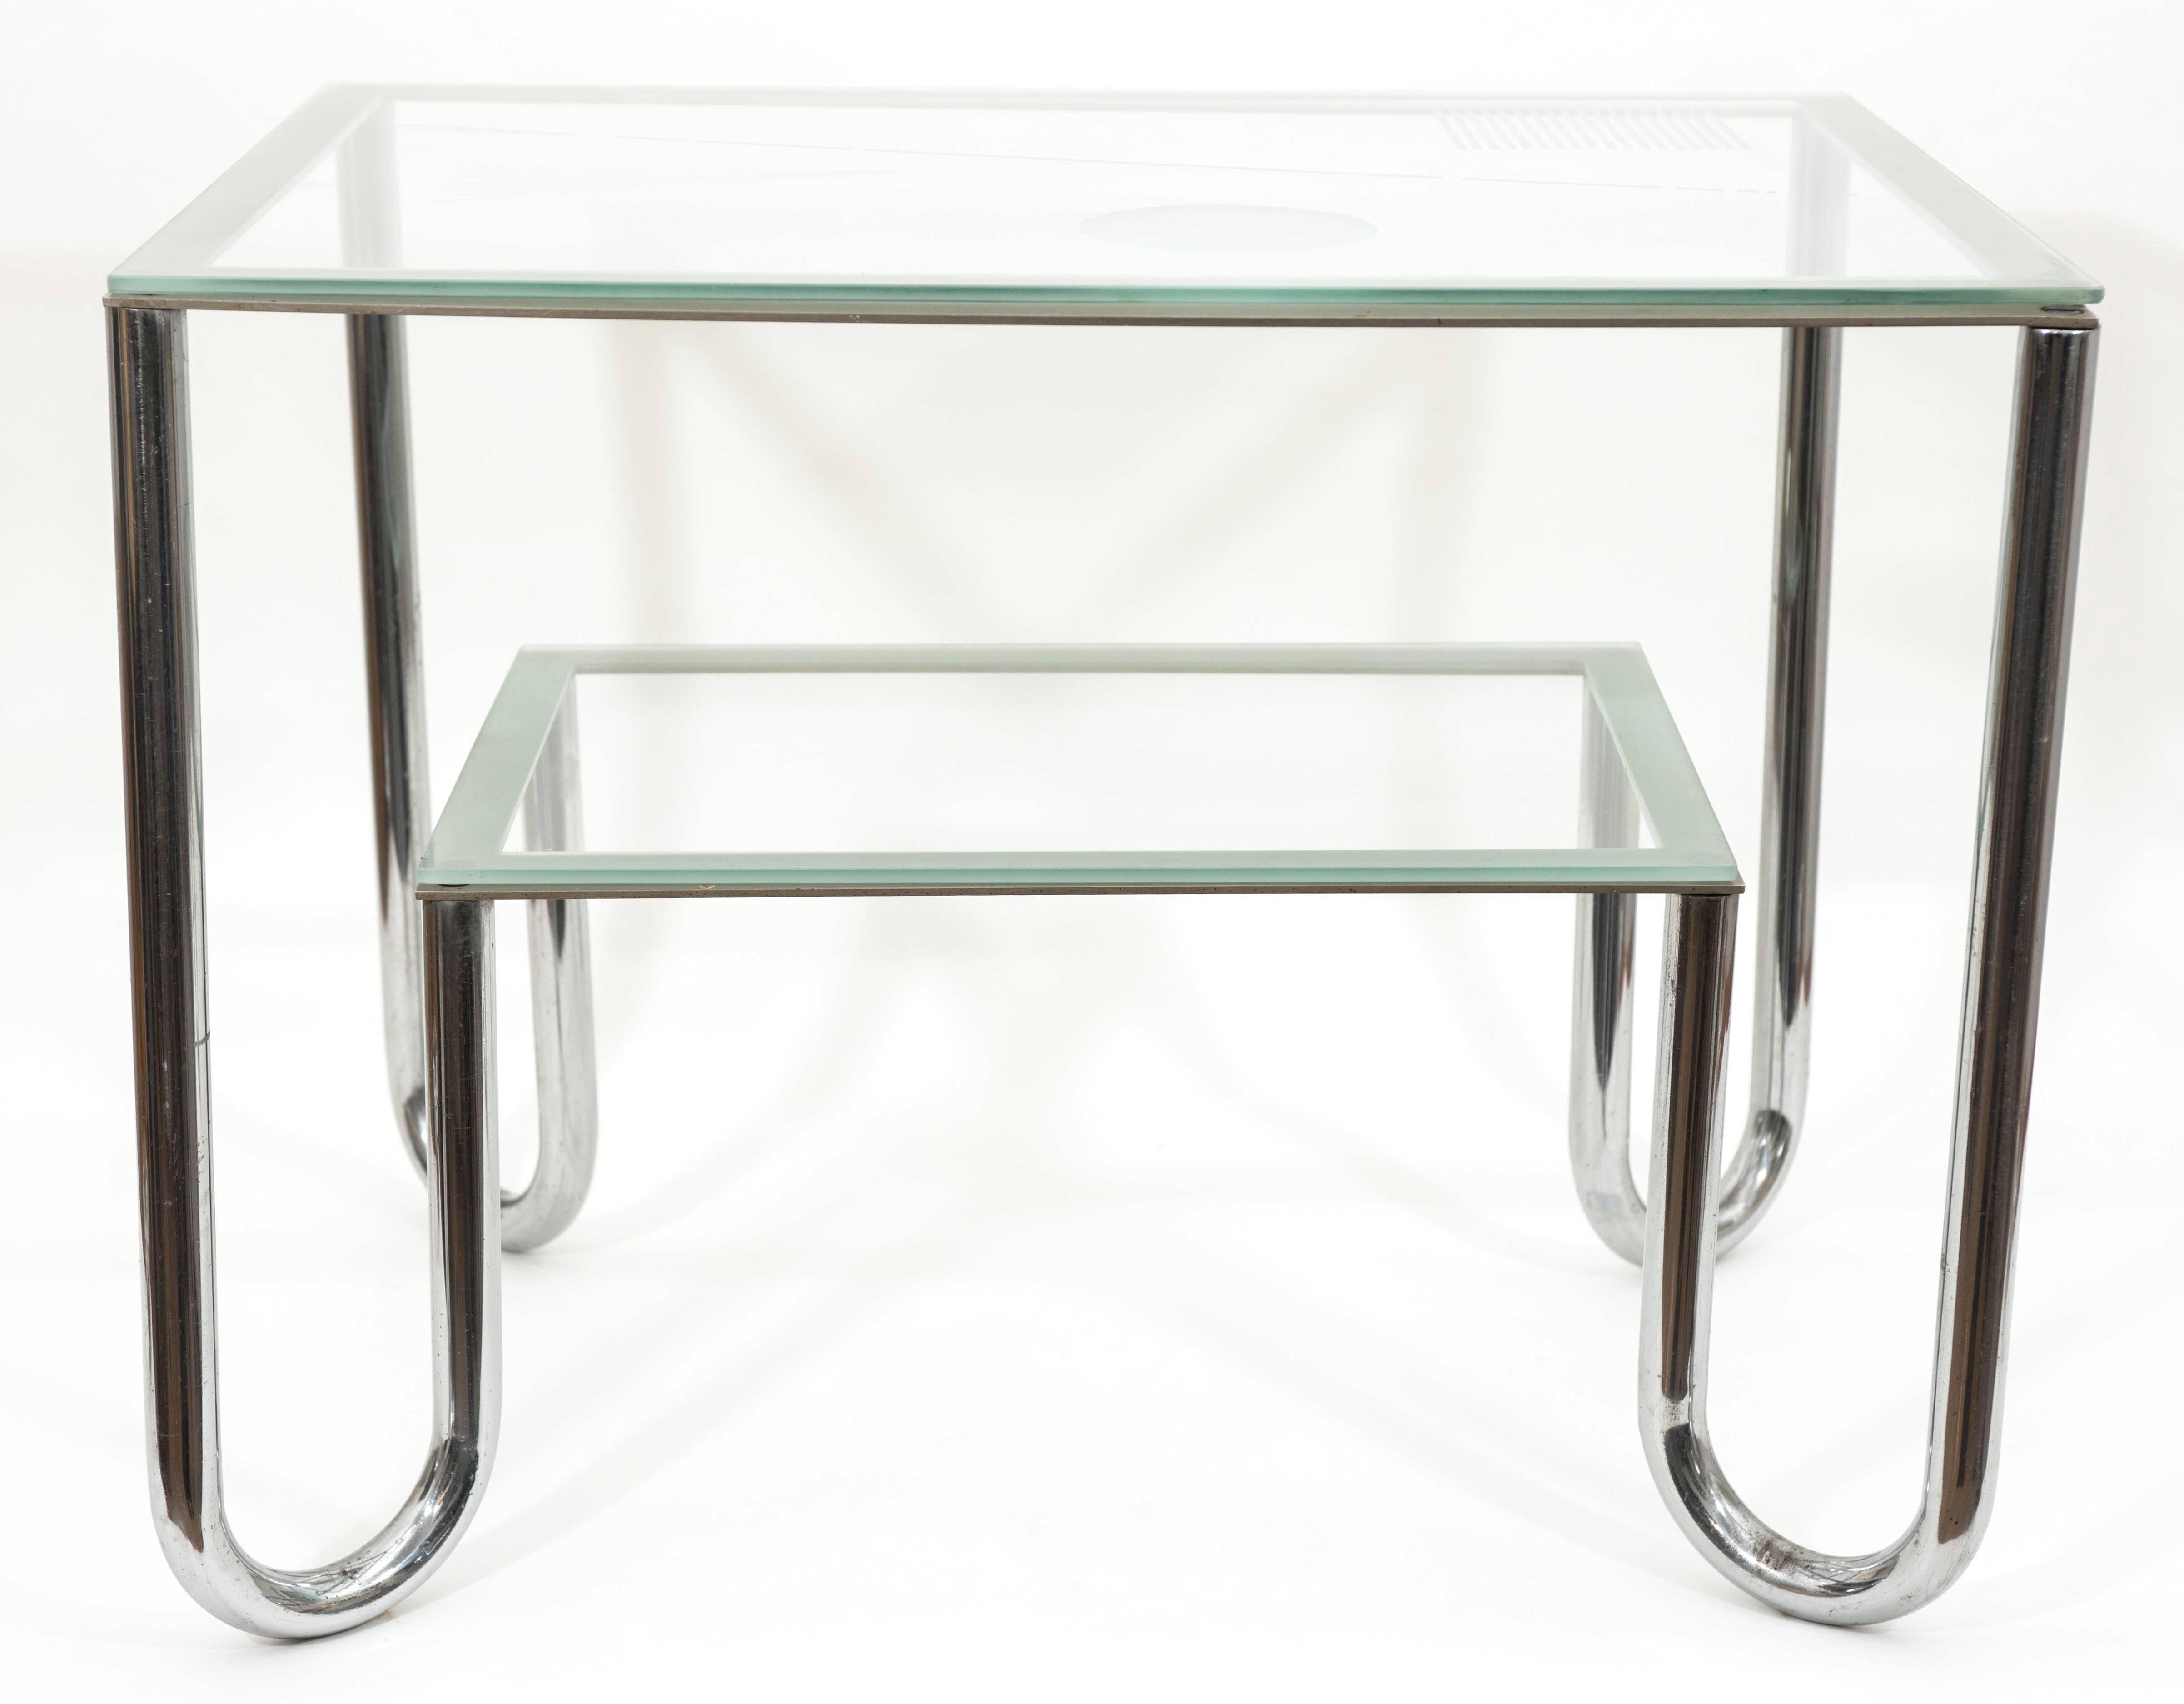 Rare Art Deco nickel-plated tube two level coffee table with sand blasted geometrical composition glass top.